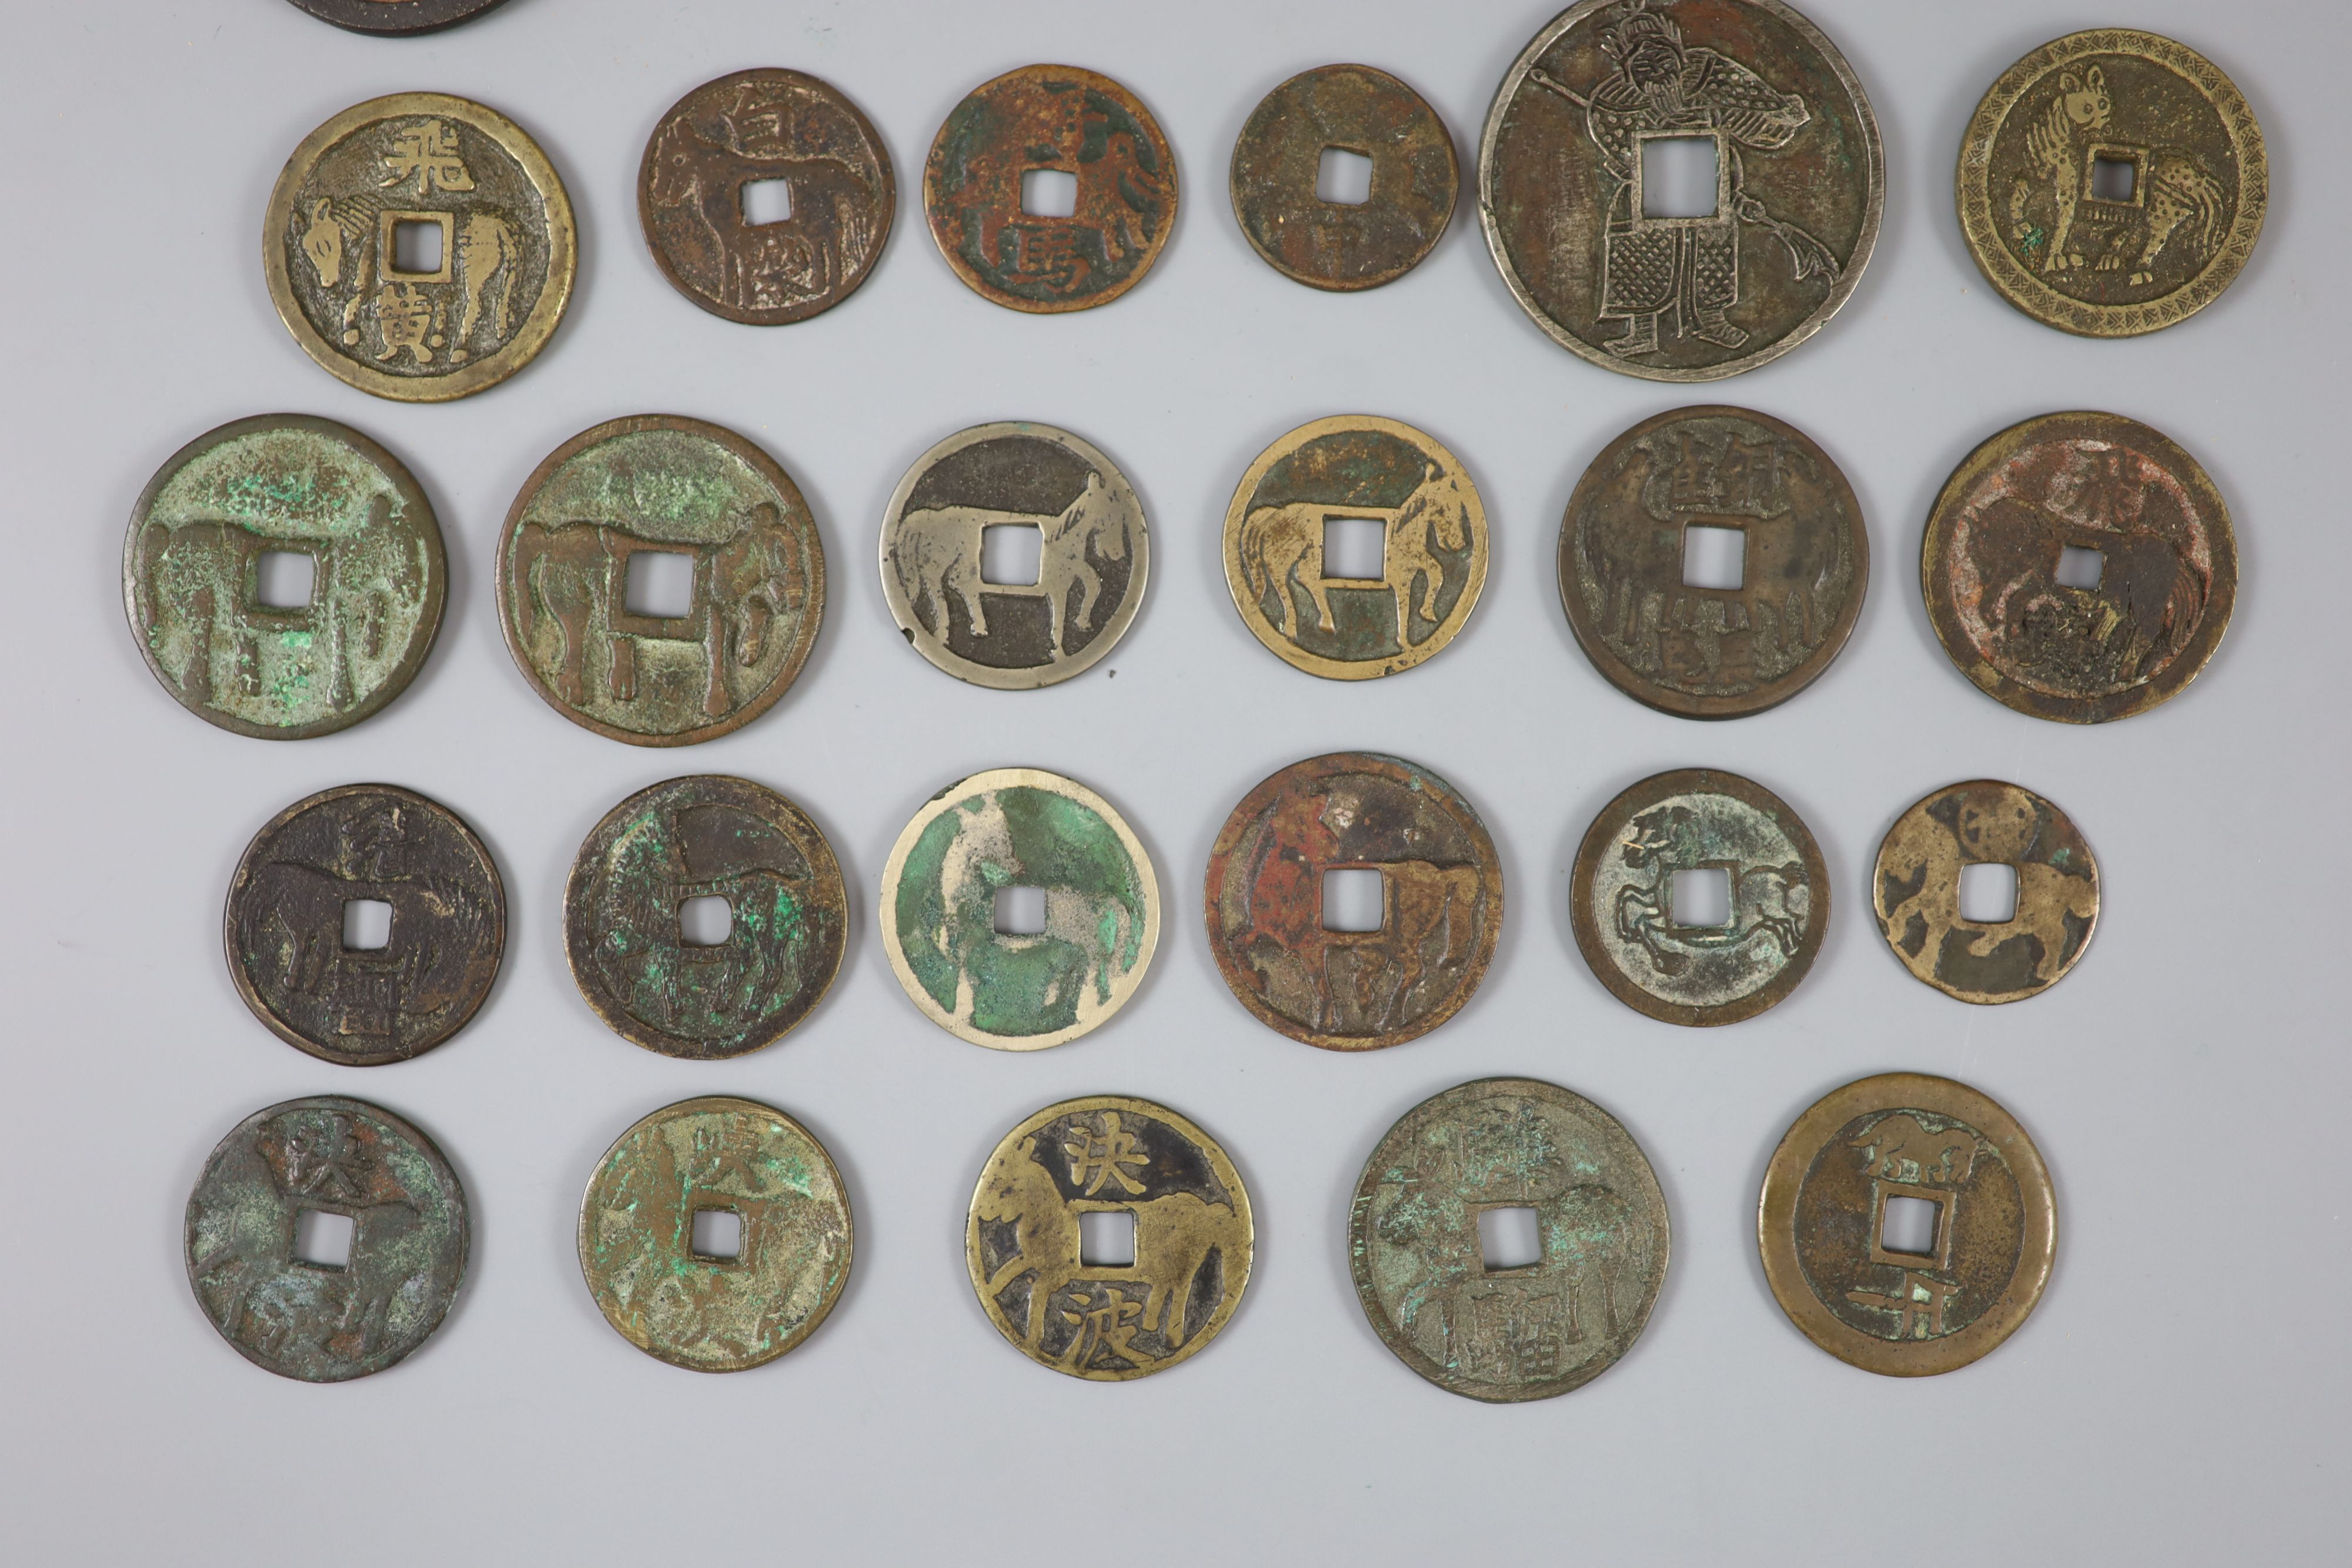 China, 19 bronze horse gaming charms, Qing dynasty - Republic period,